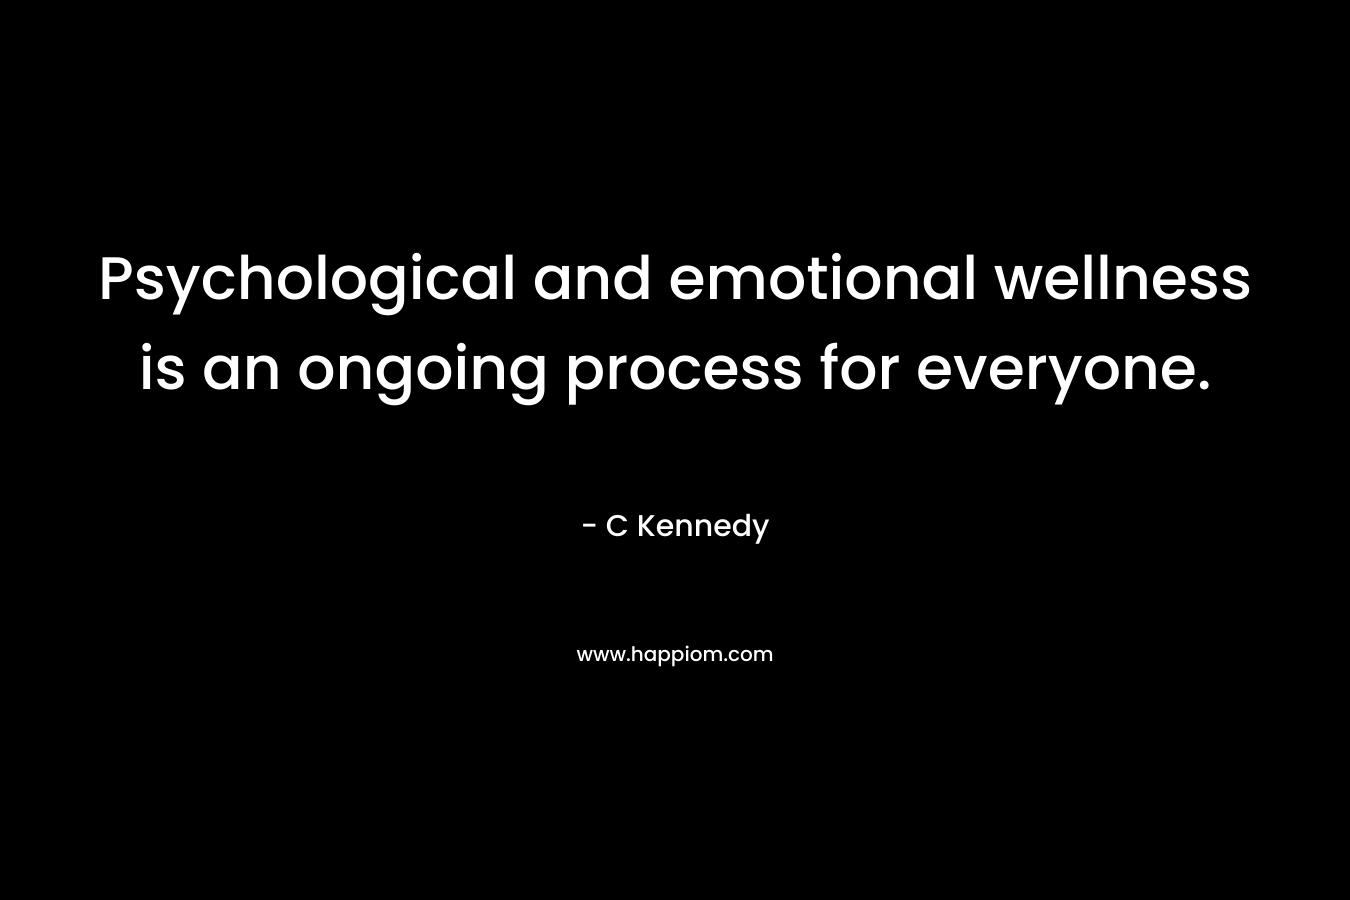 Psychological and emotional wellness is an ongoing process for everyone.